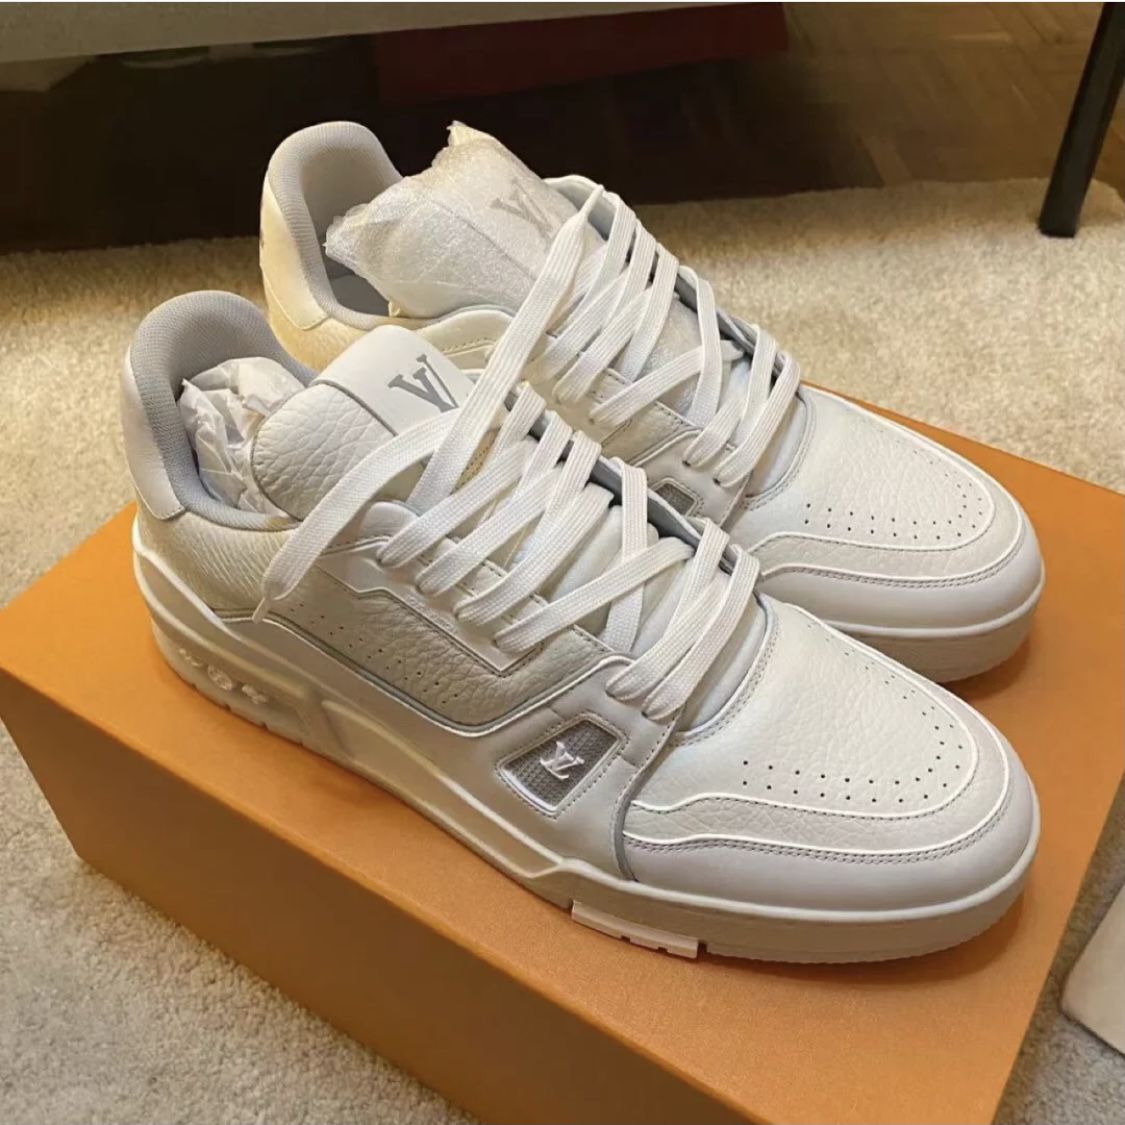 Louis Vuitton LV Trainer SS21 White Grey for Sale in Seattle, WA - OfferUp